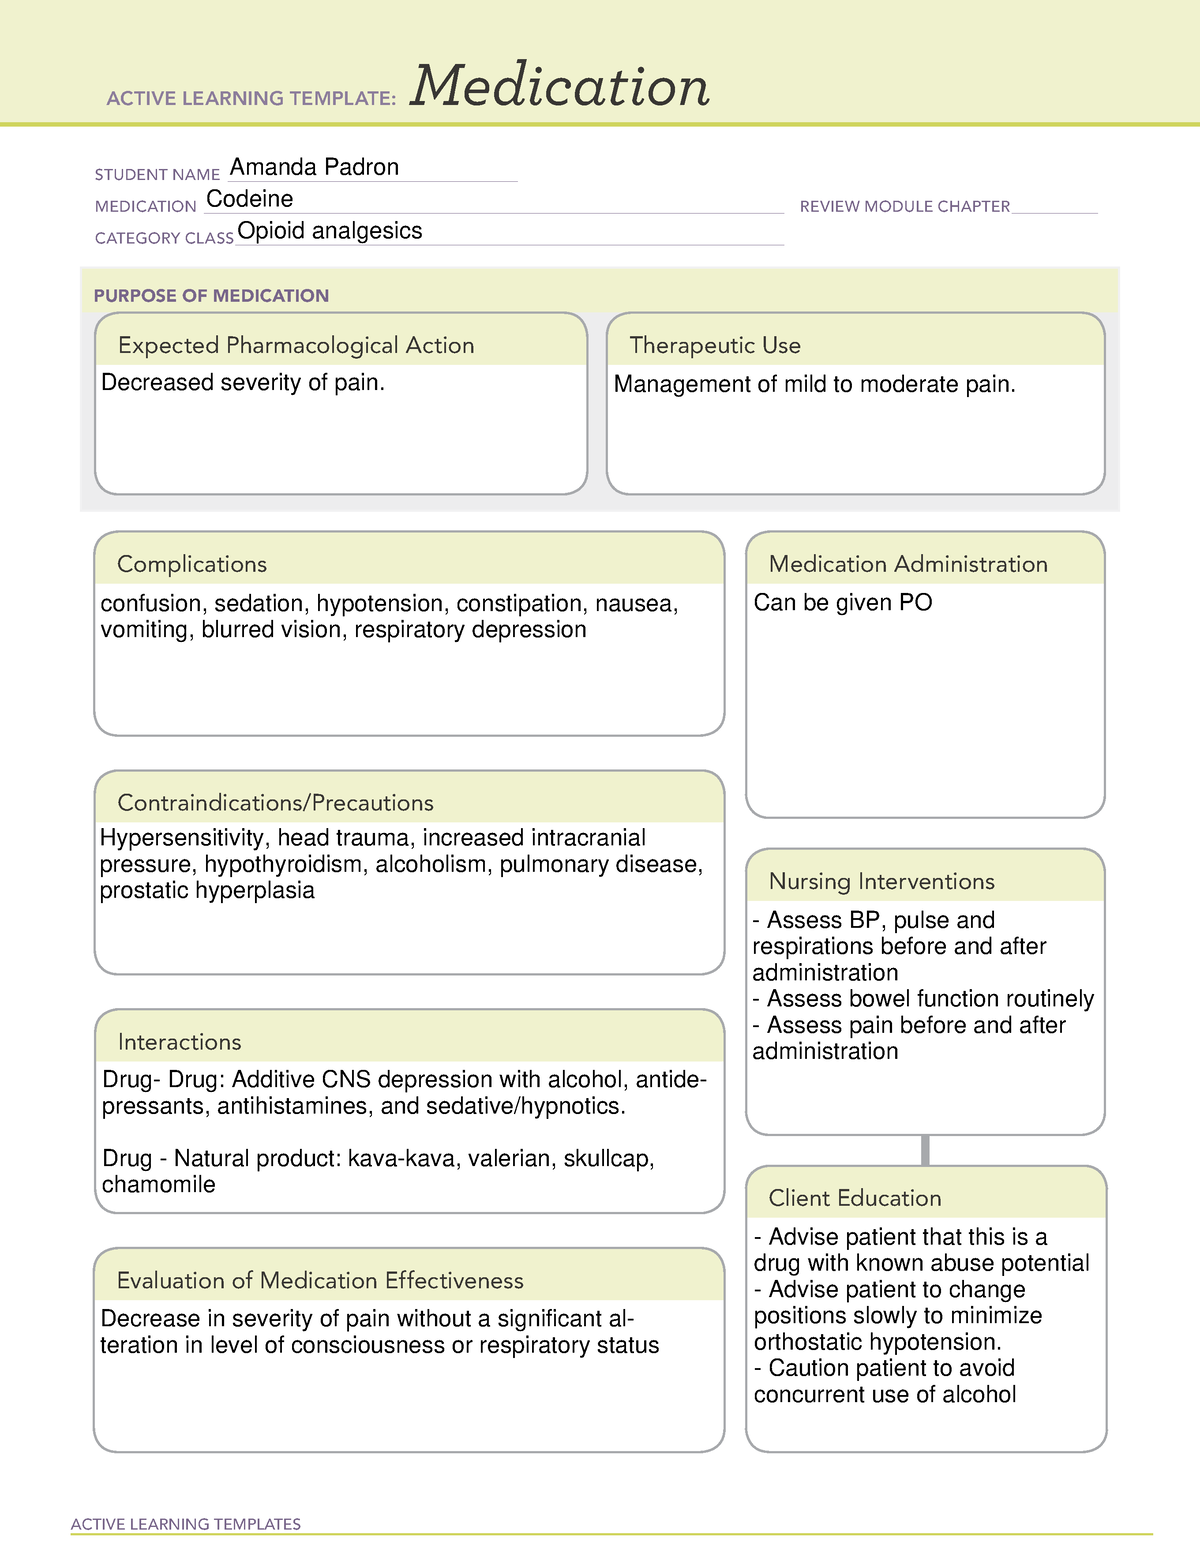 Codeine medication template ACTIVE LEARNING TEMPLATES Medication